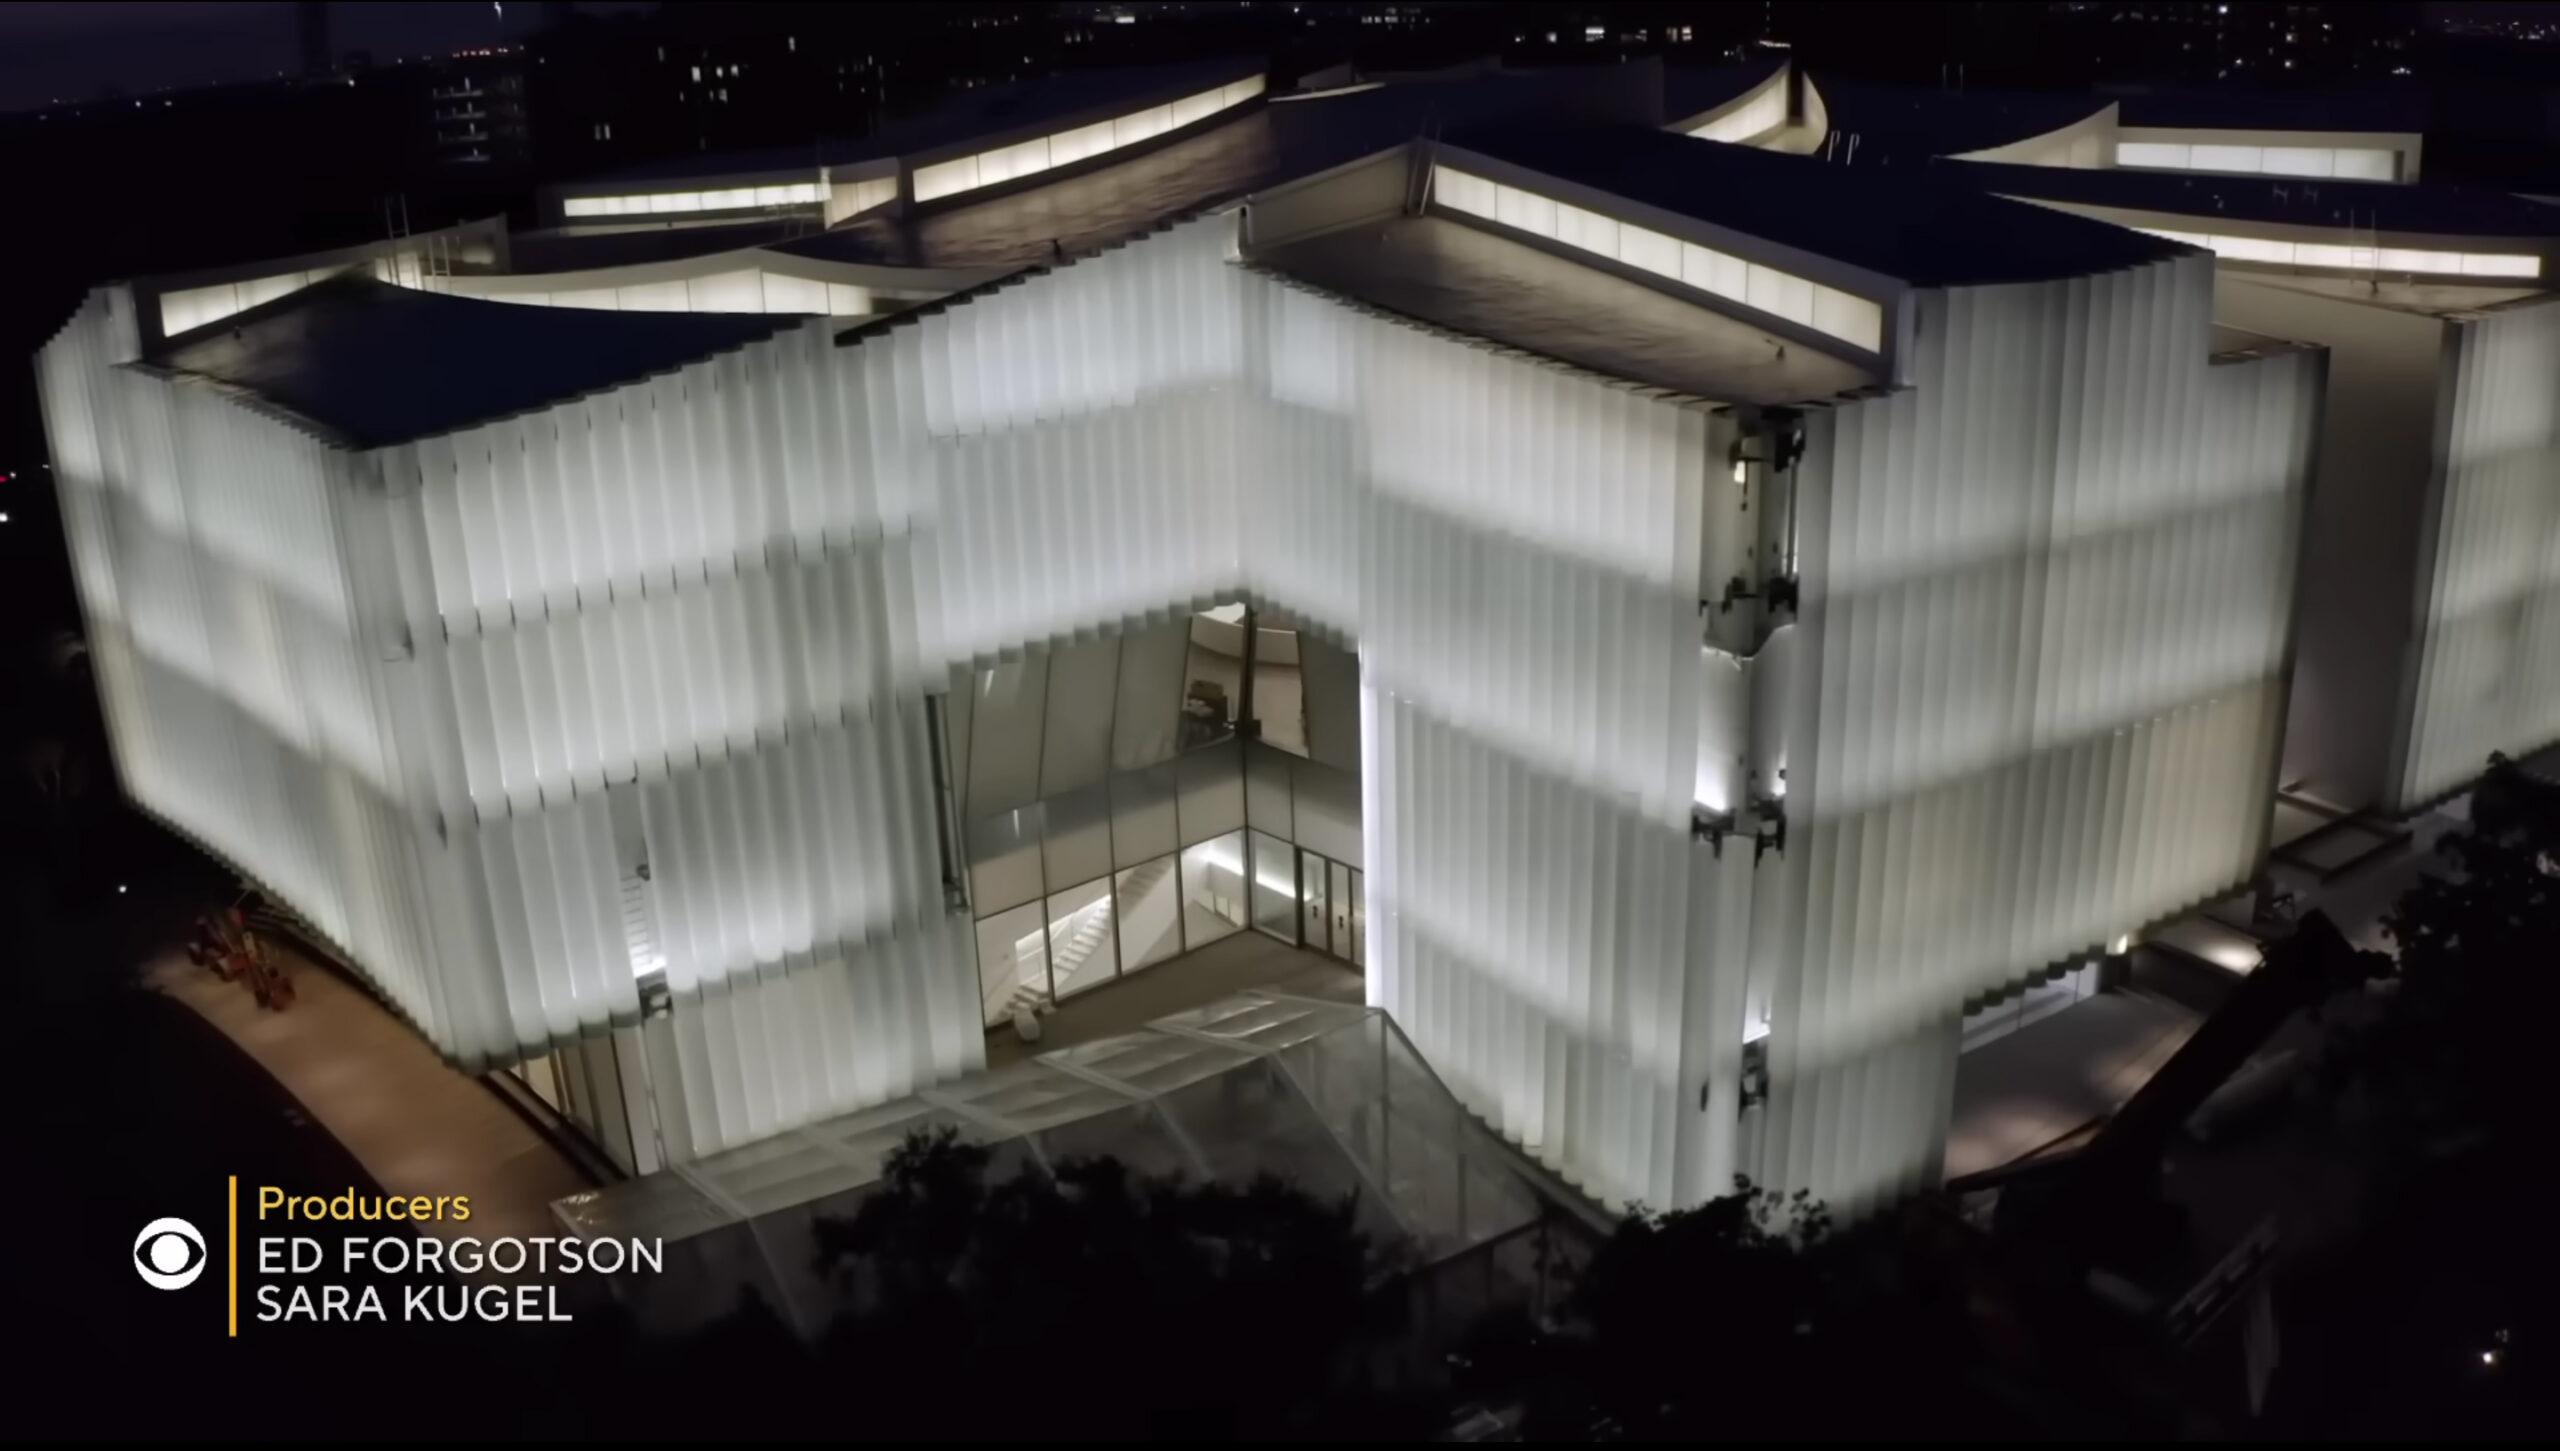 CBS Sunday Morning “The luminist architecture of Steven Holl”